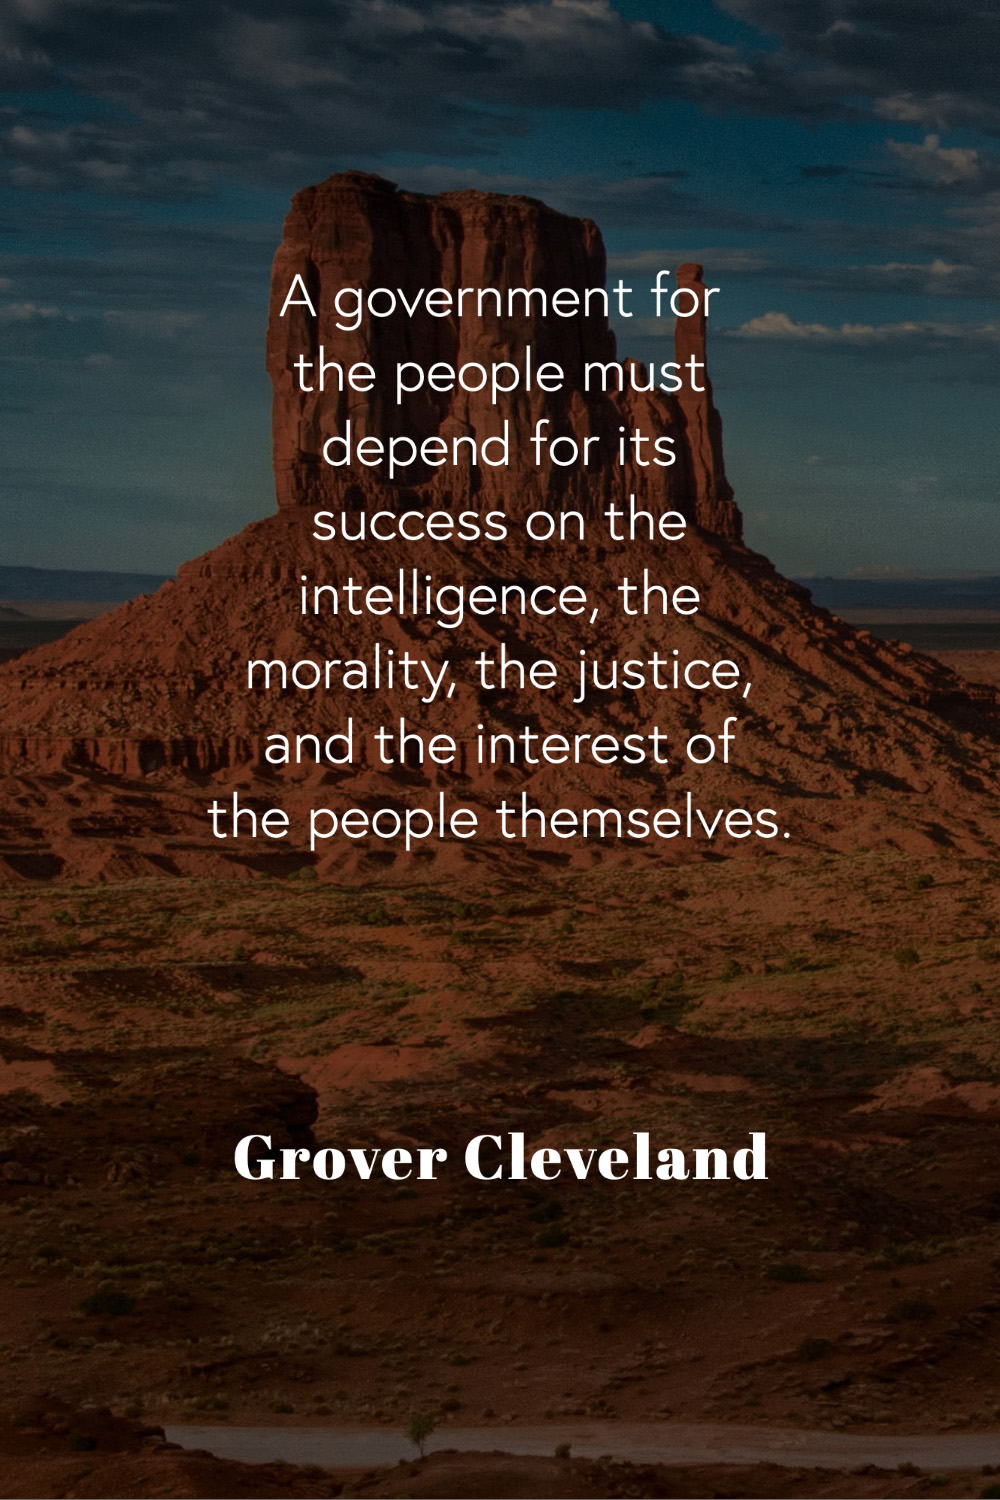 Quote by Grover Cleveland